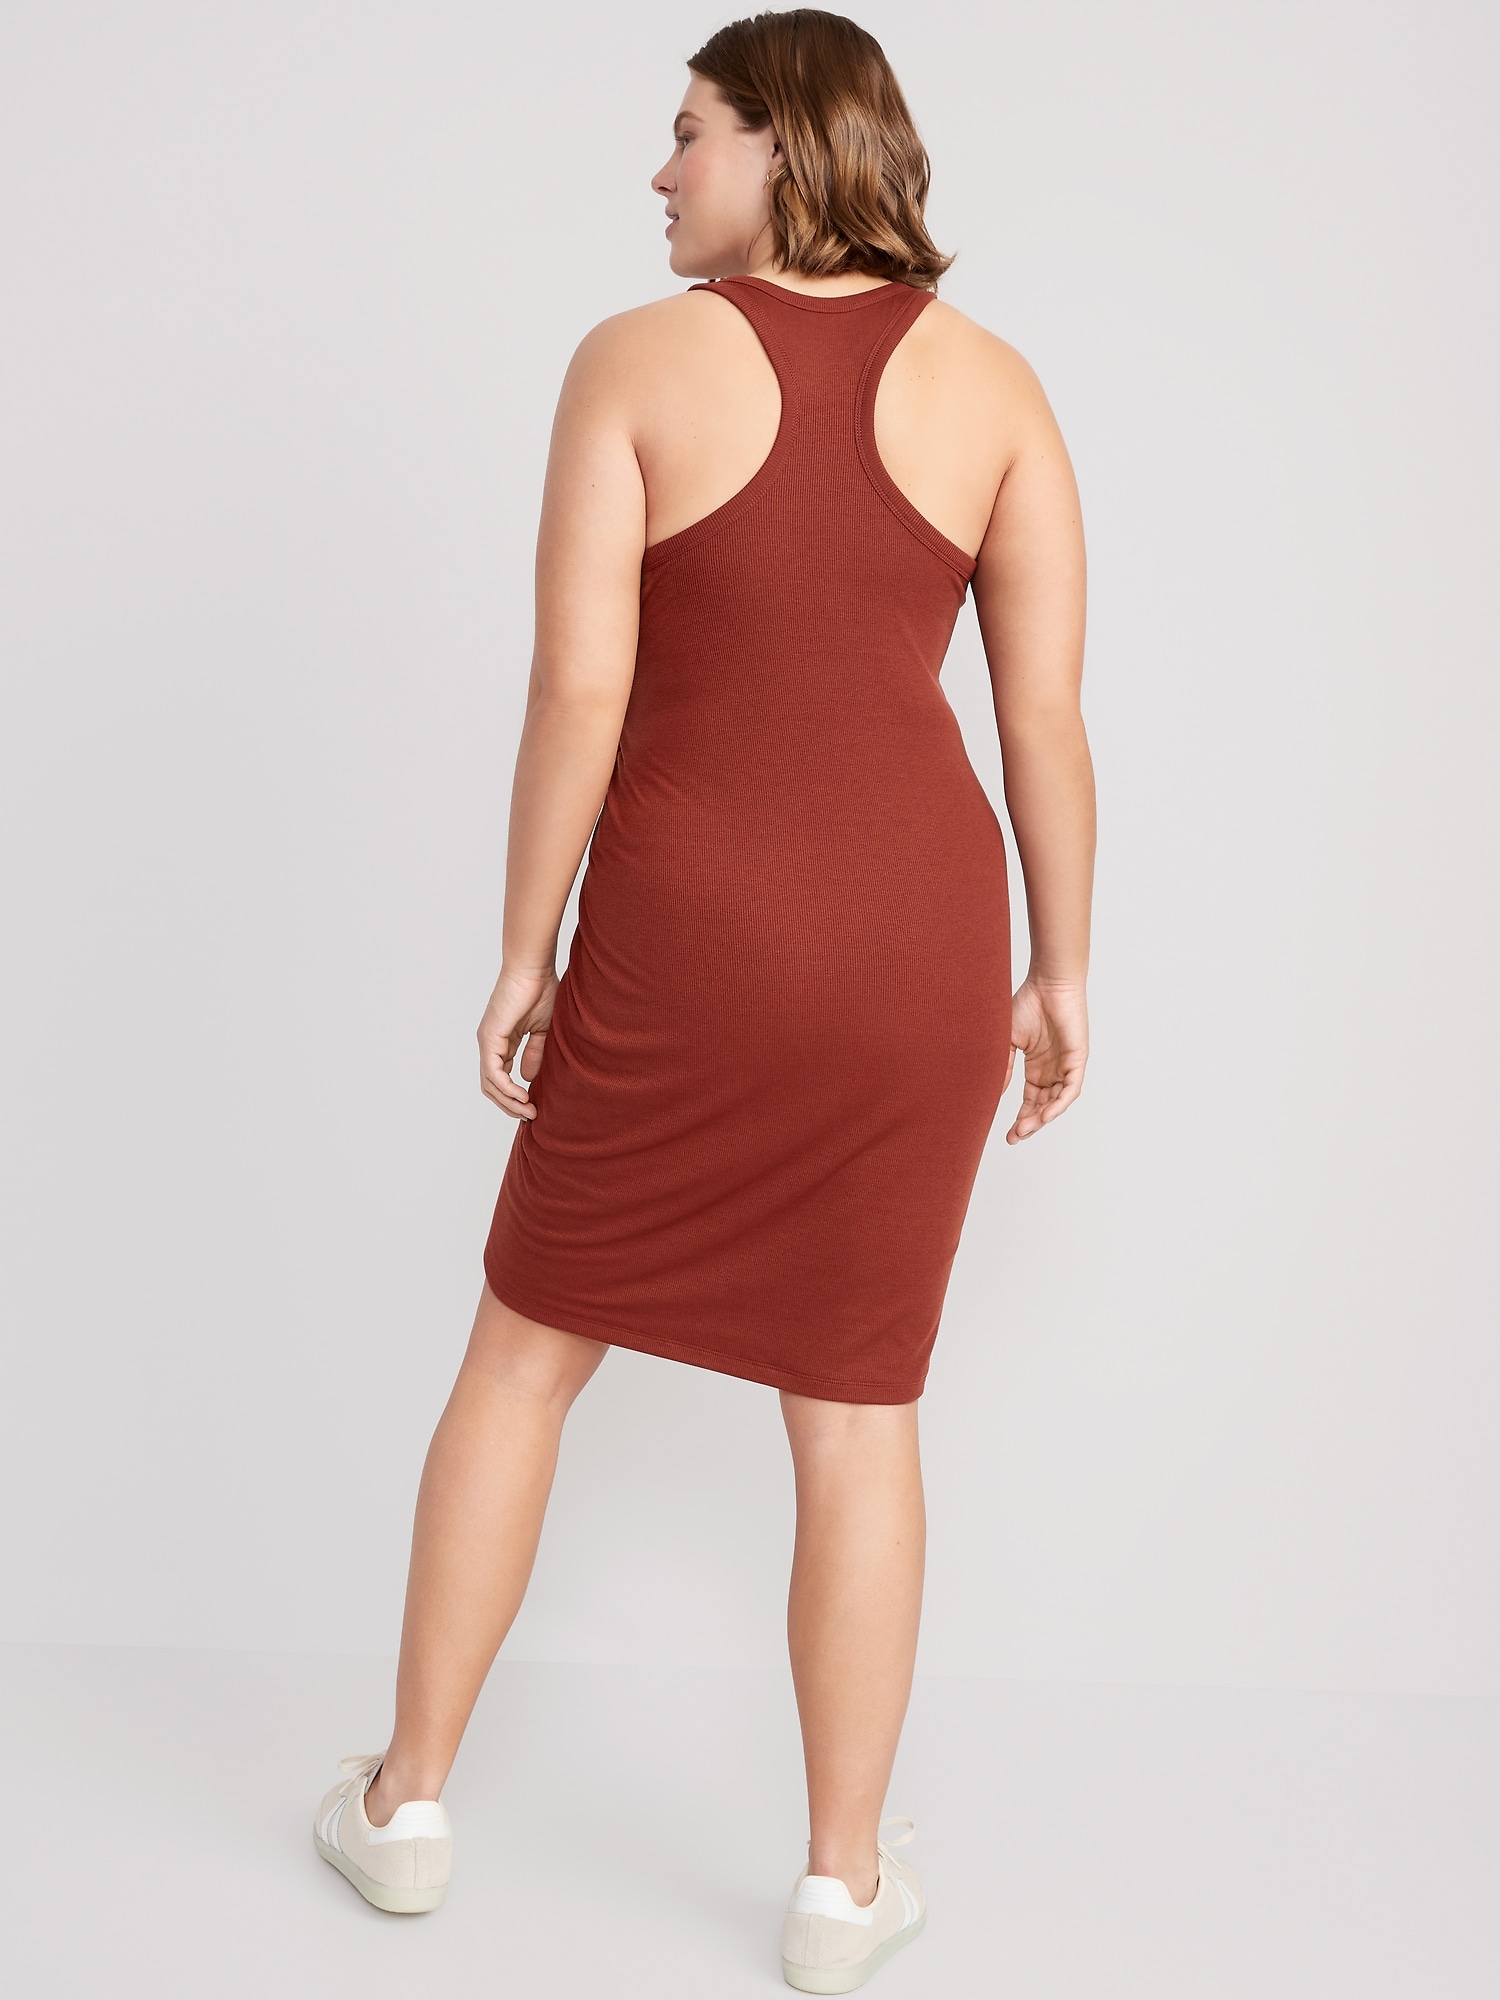 UltraLite Racerback Rib-Knit Ruched Dress for Women | Old Navy